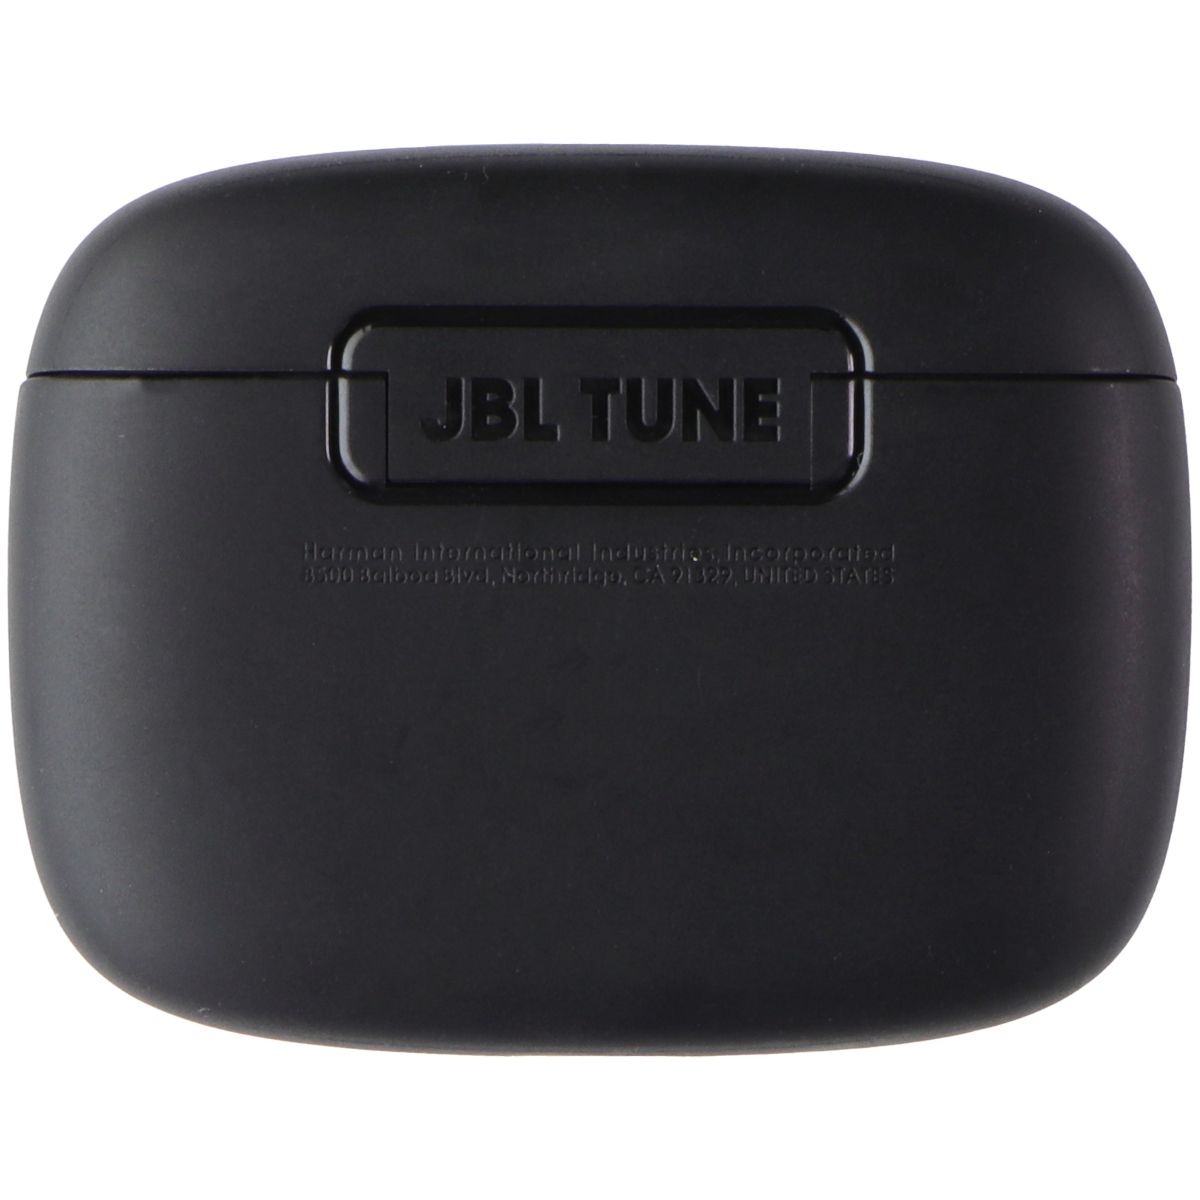 Replacement Charging Case for JBL Tune Buds True Wireless NC Earbuds - Black